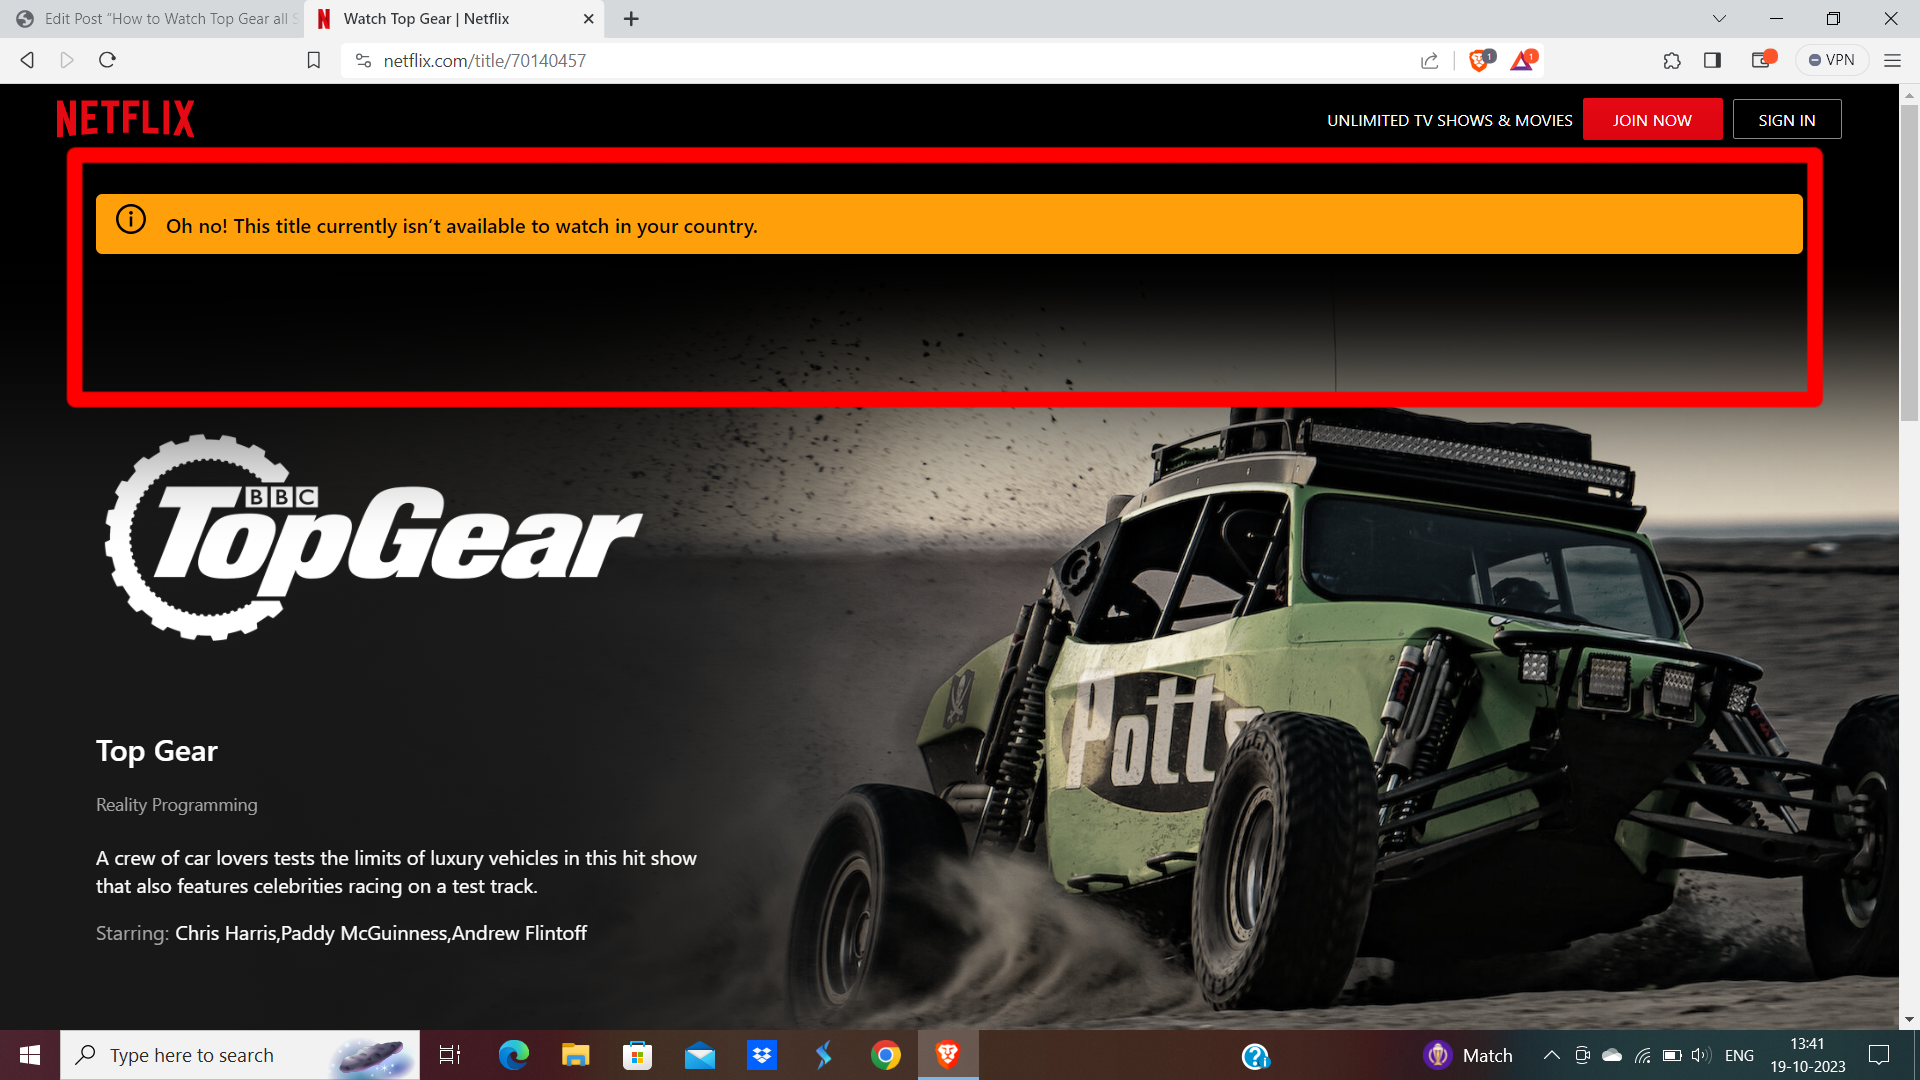 Top Gear is not available on Netflix